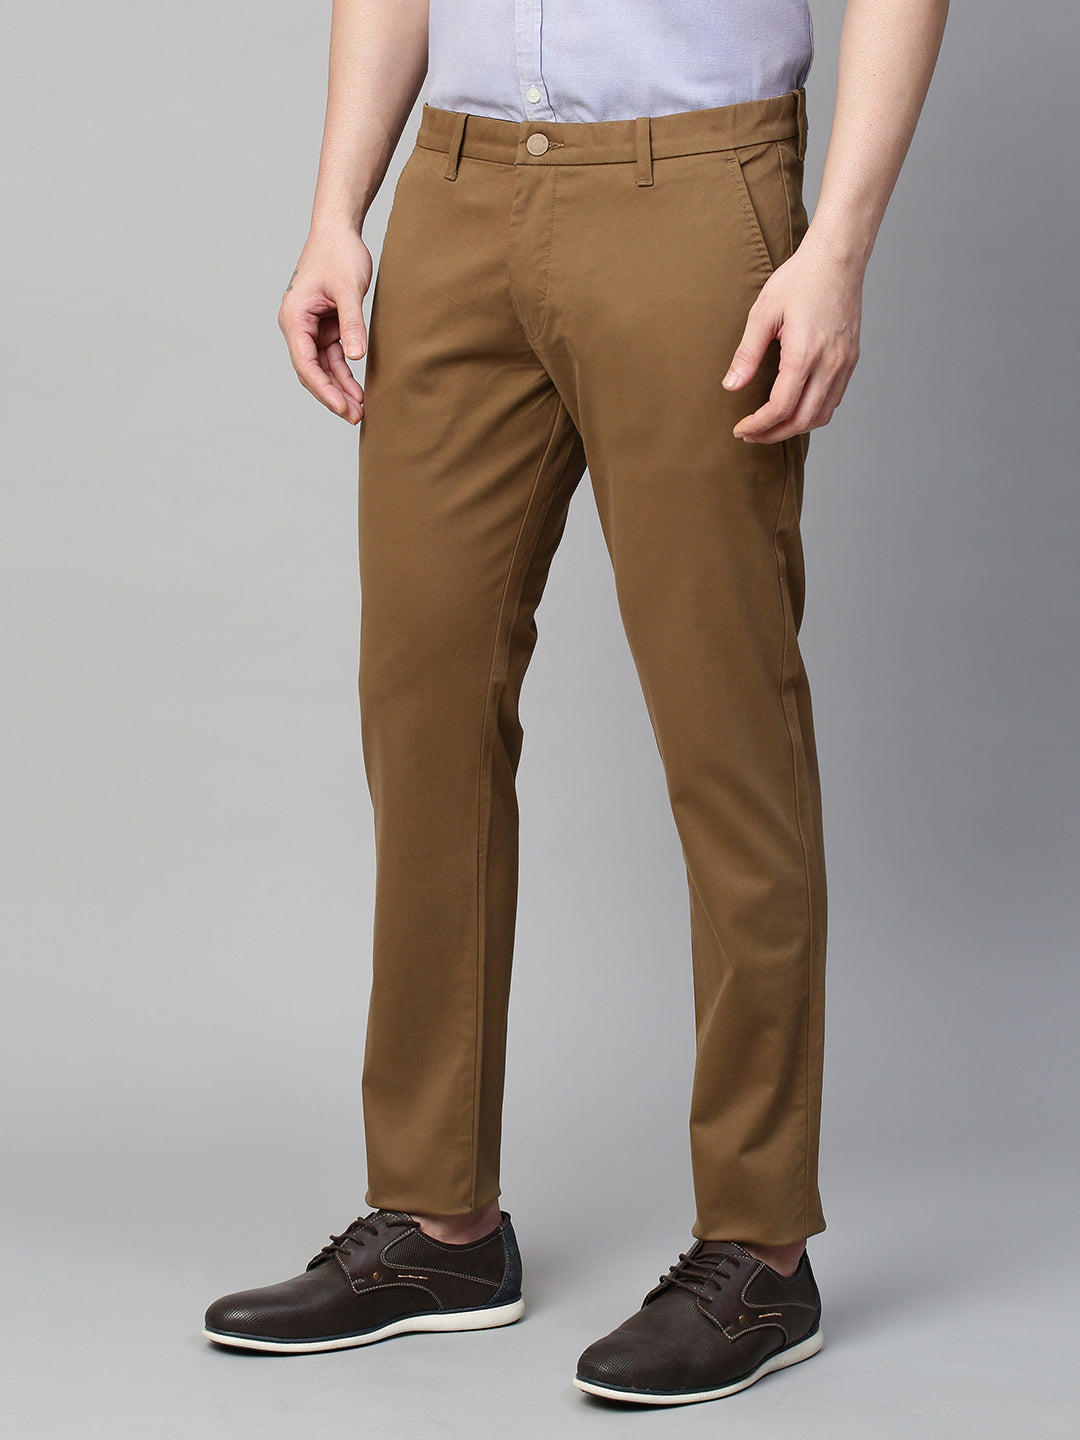 Genips Men's Brown Cotton Stretch Caribbean Slim Fit Solid Trousers